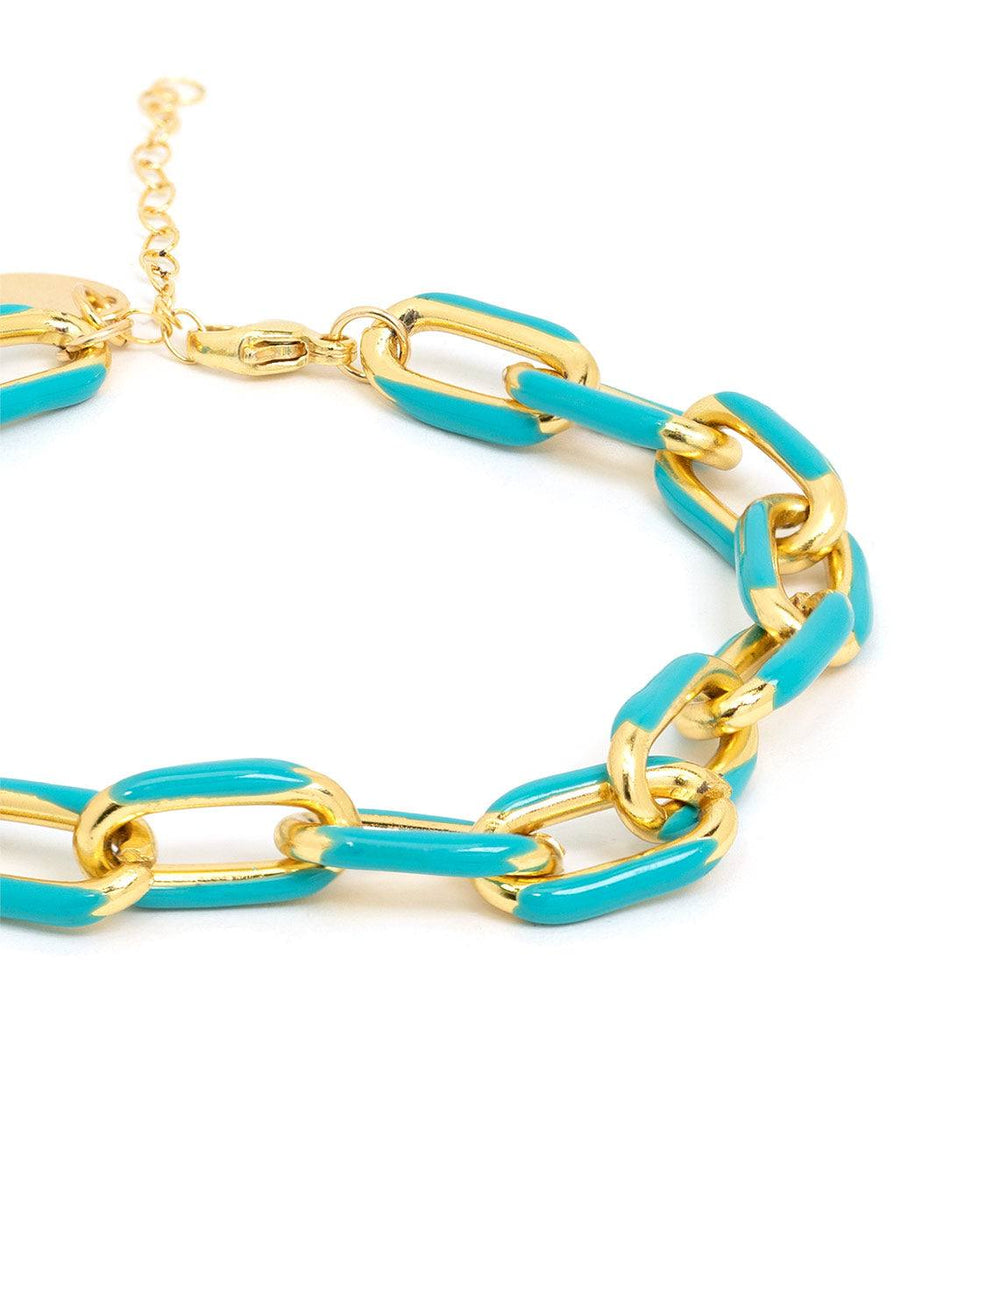 Close-up view of Jonesy Wood's eloise turquoise chain bracelet.